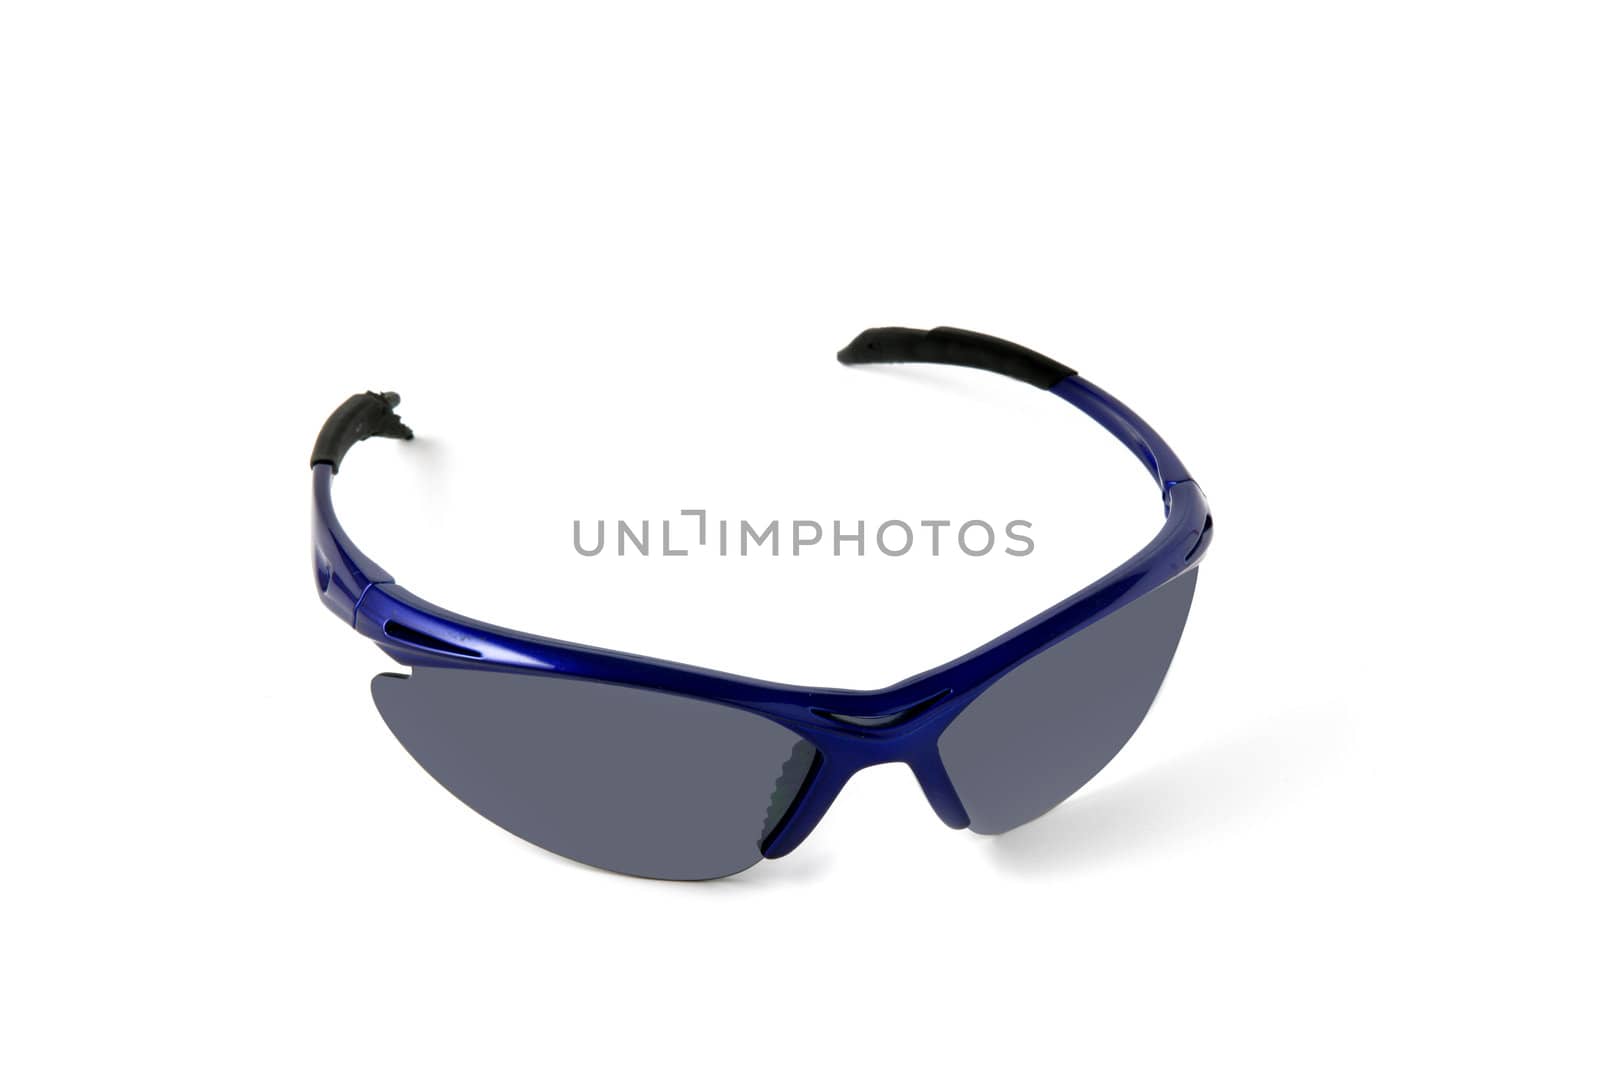 Pair of sports sunglasses by phovoir